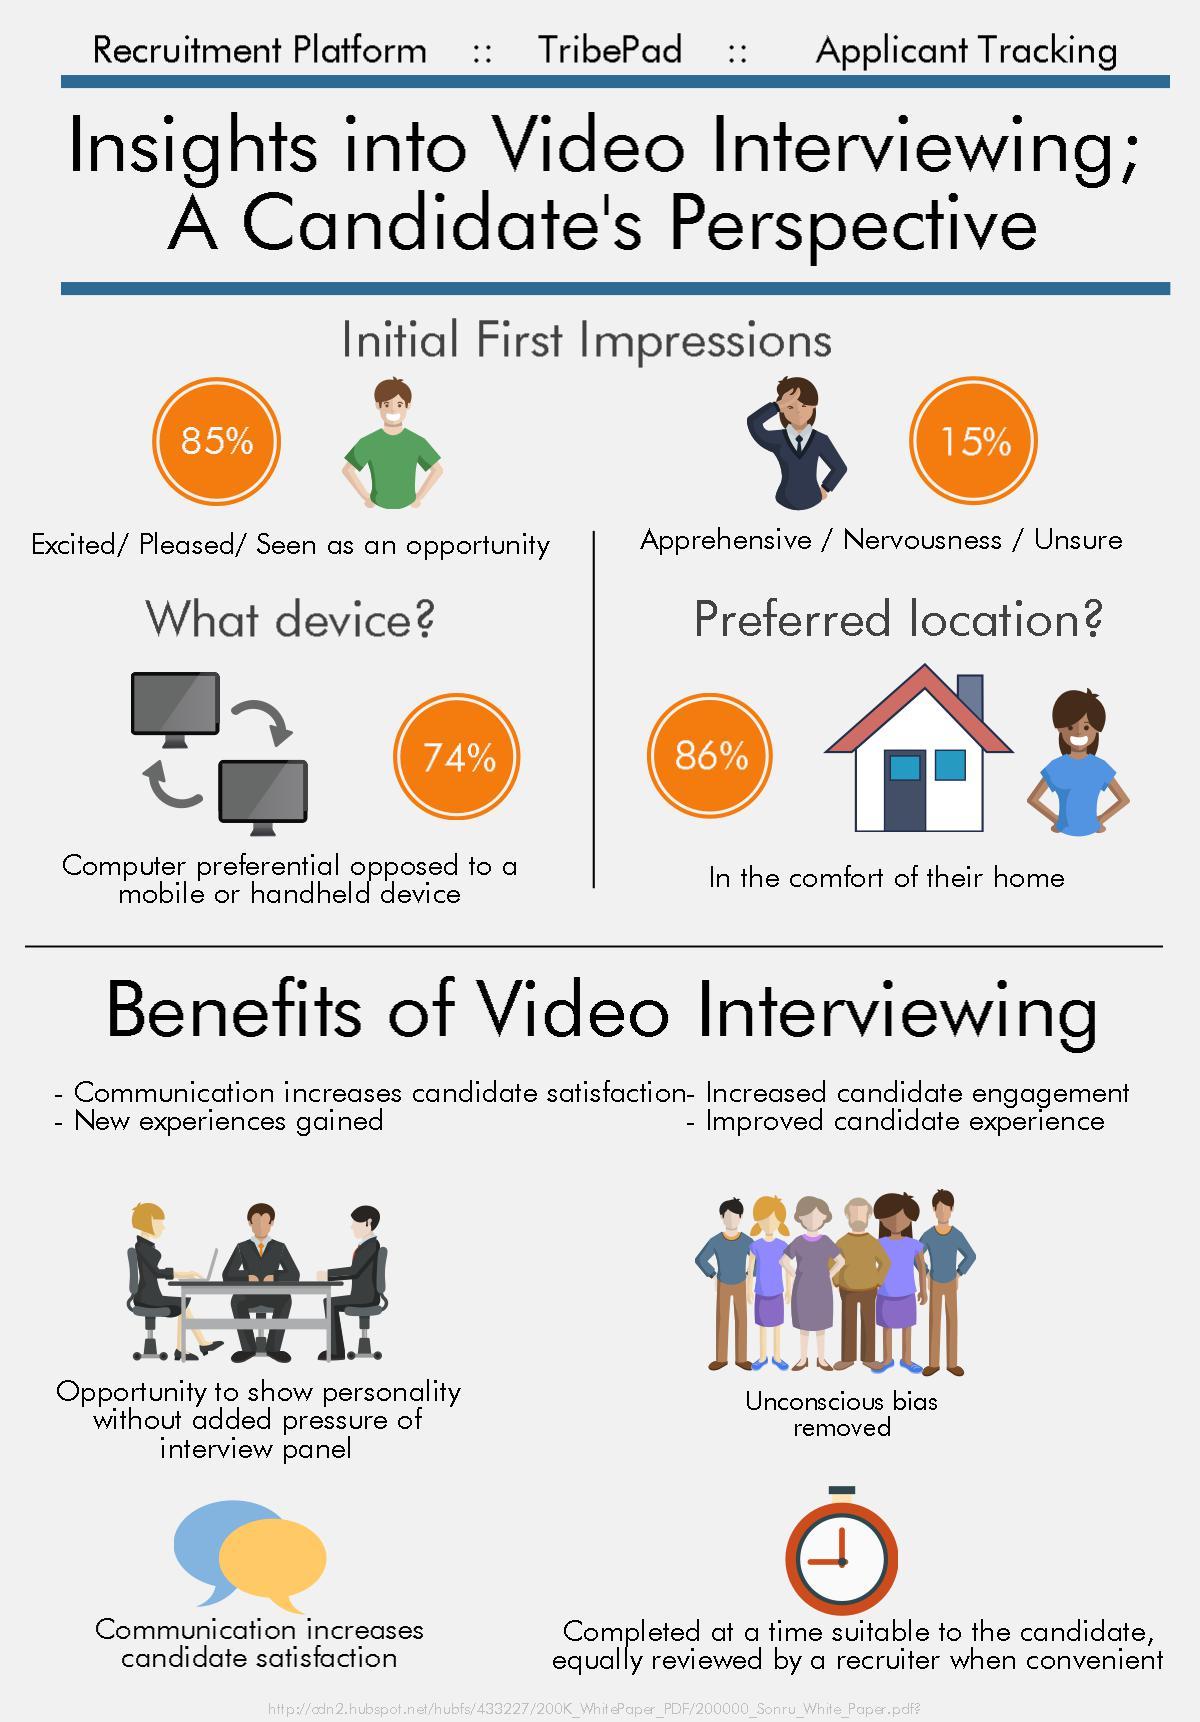 Video Interviewing from a Candidate's Perspective Infographic